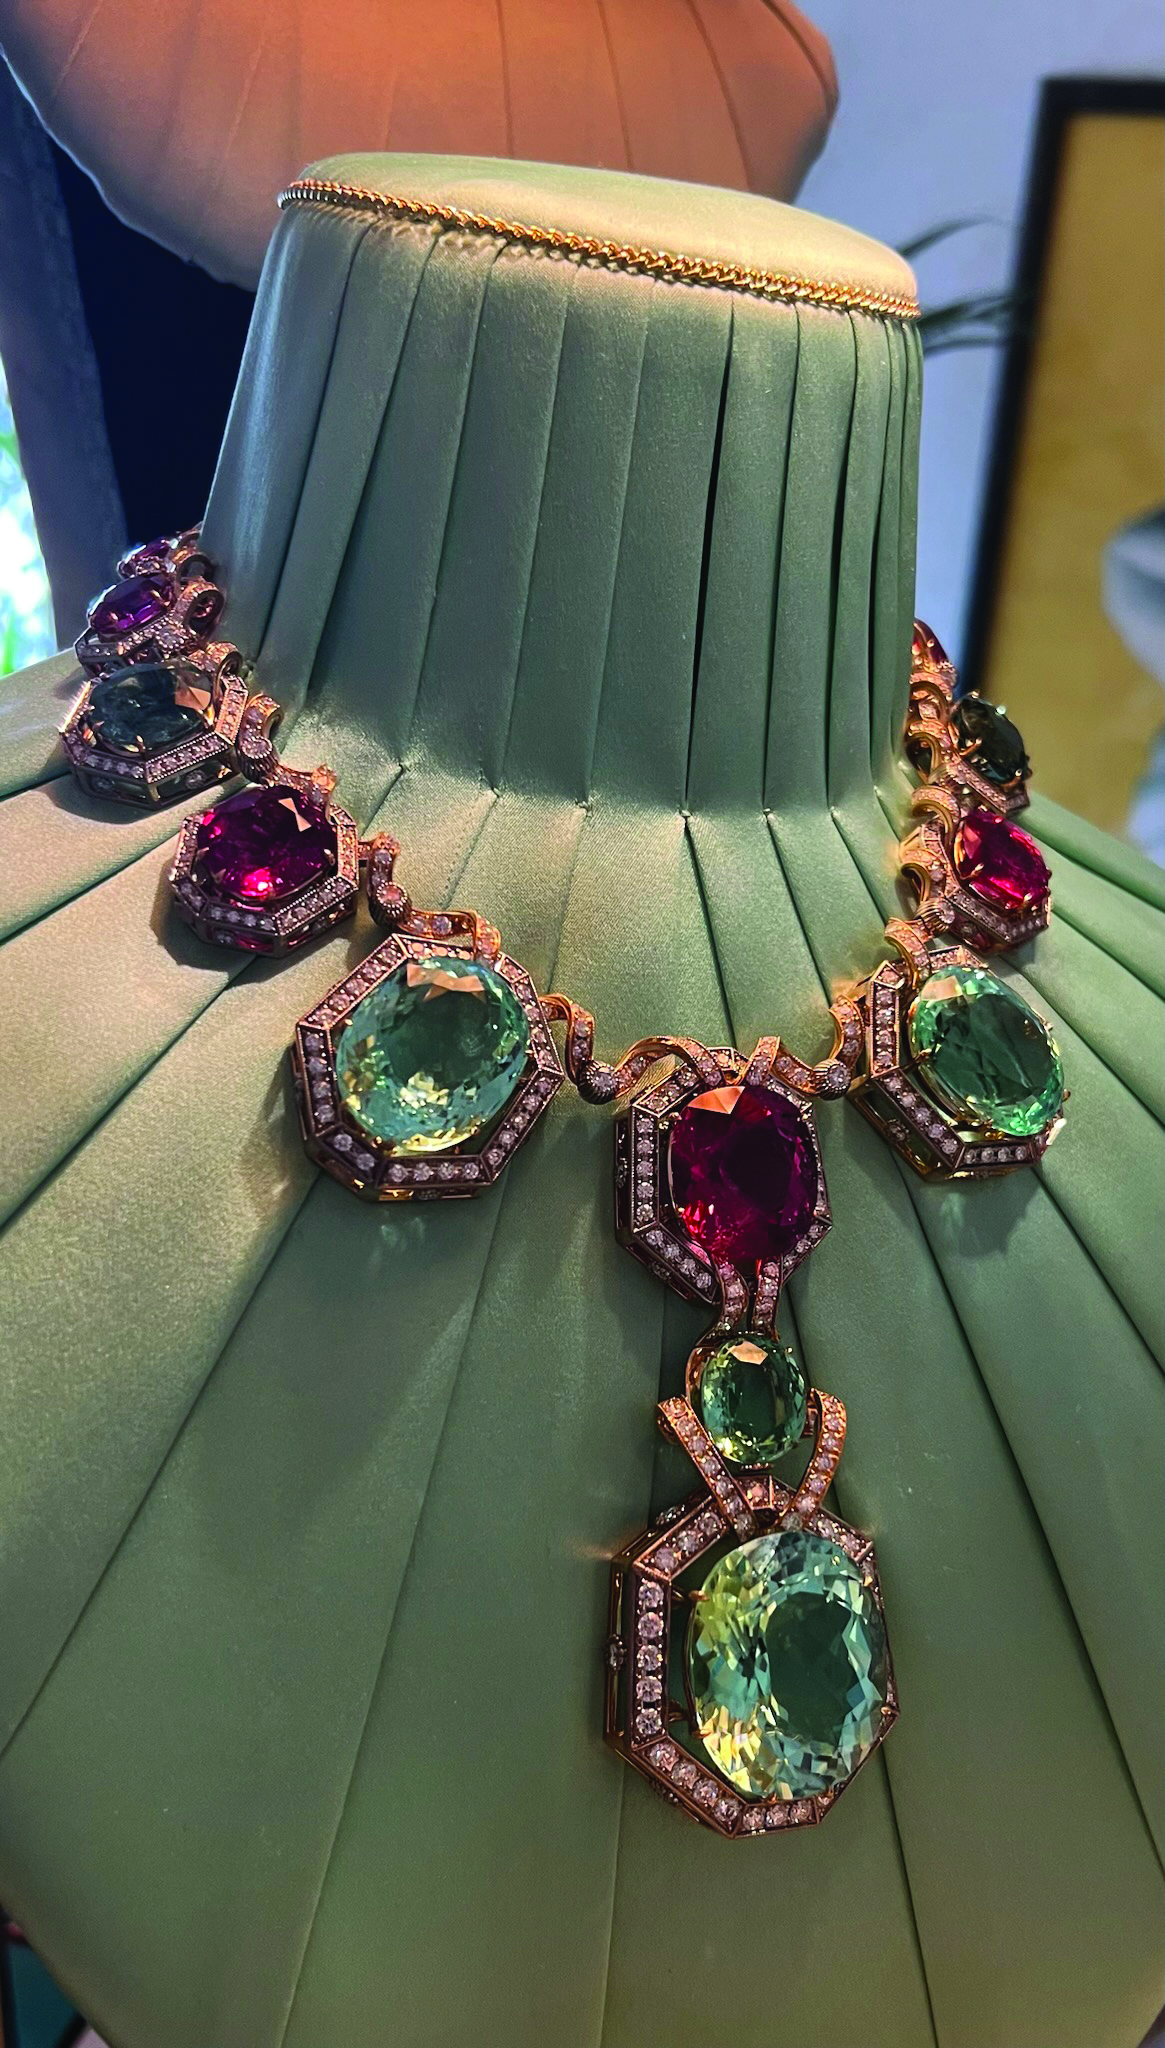 Necklace by Dolce & Gabbana at Palm Beach Atelier